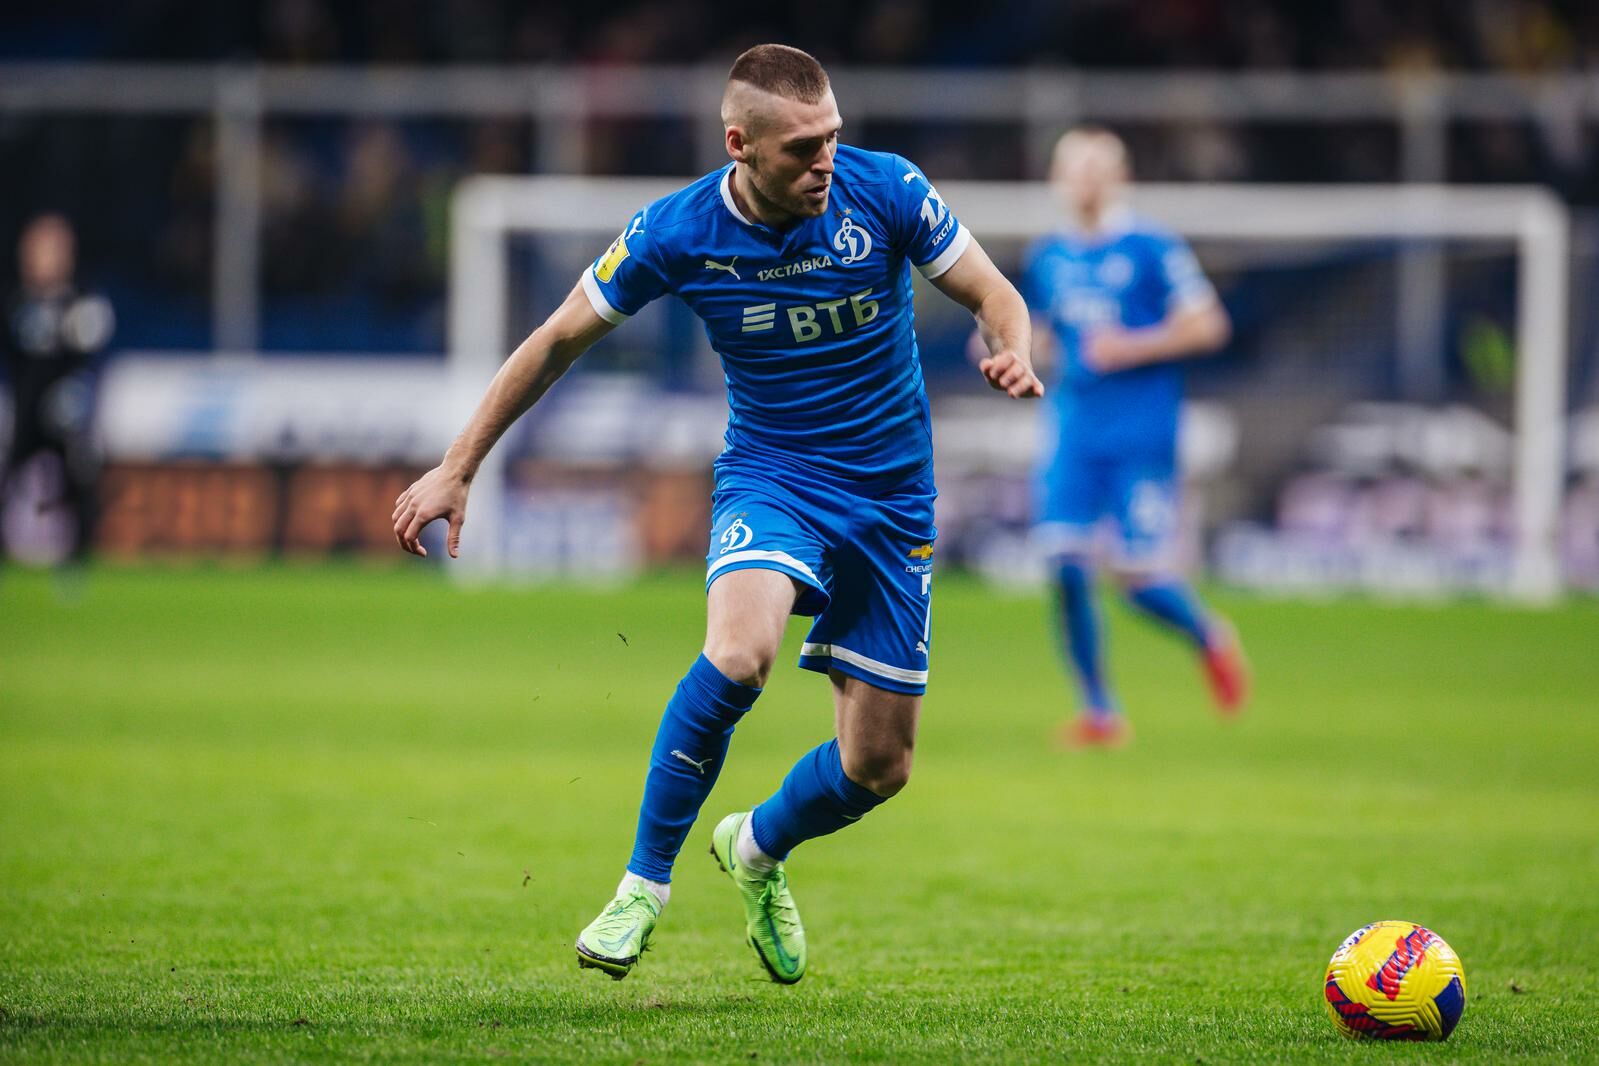 Dmitry Skopintsev: We earned an important point that would help us by the end of the season